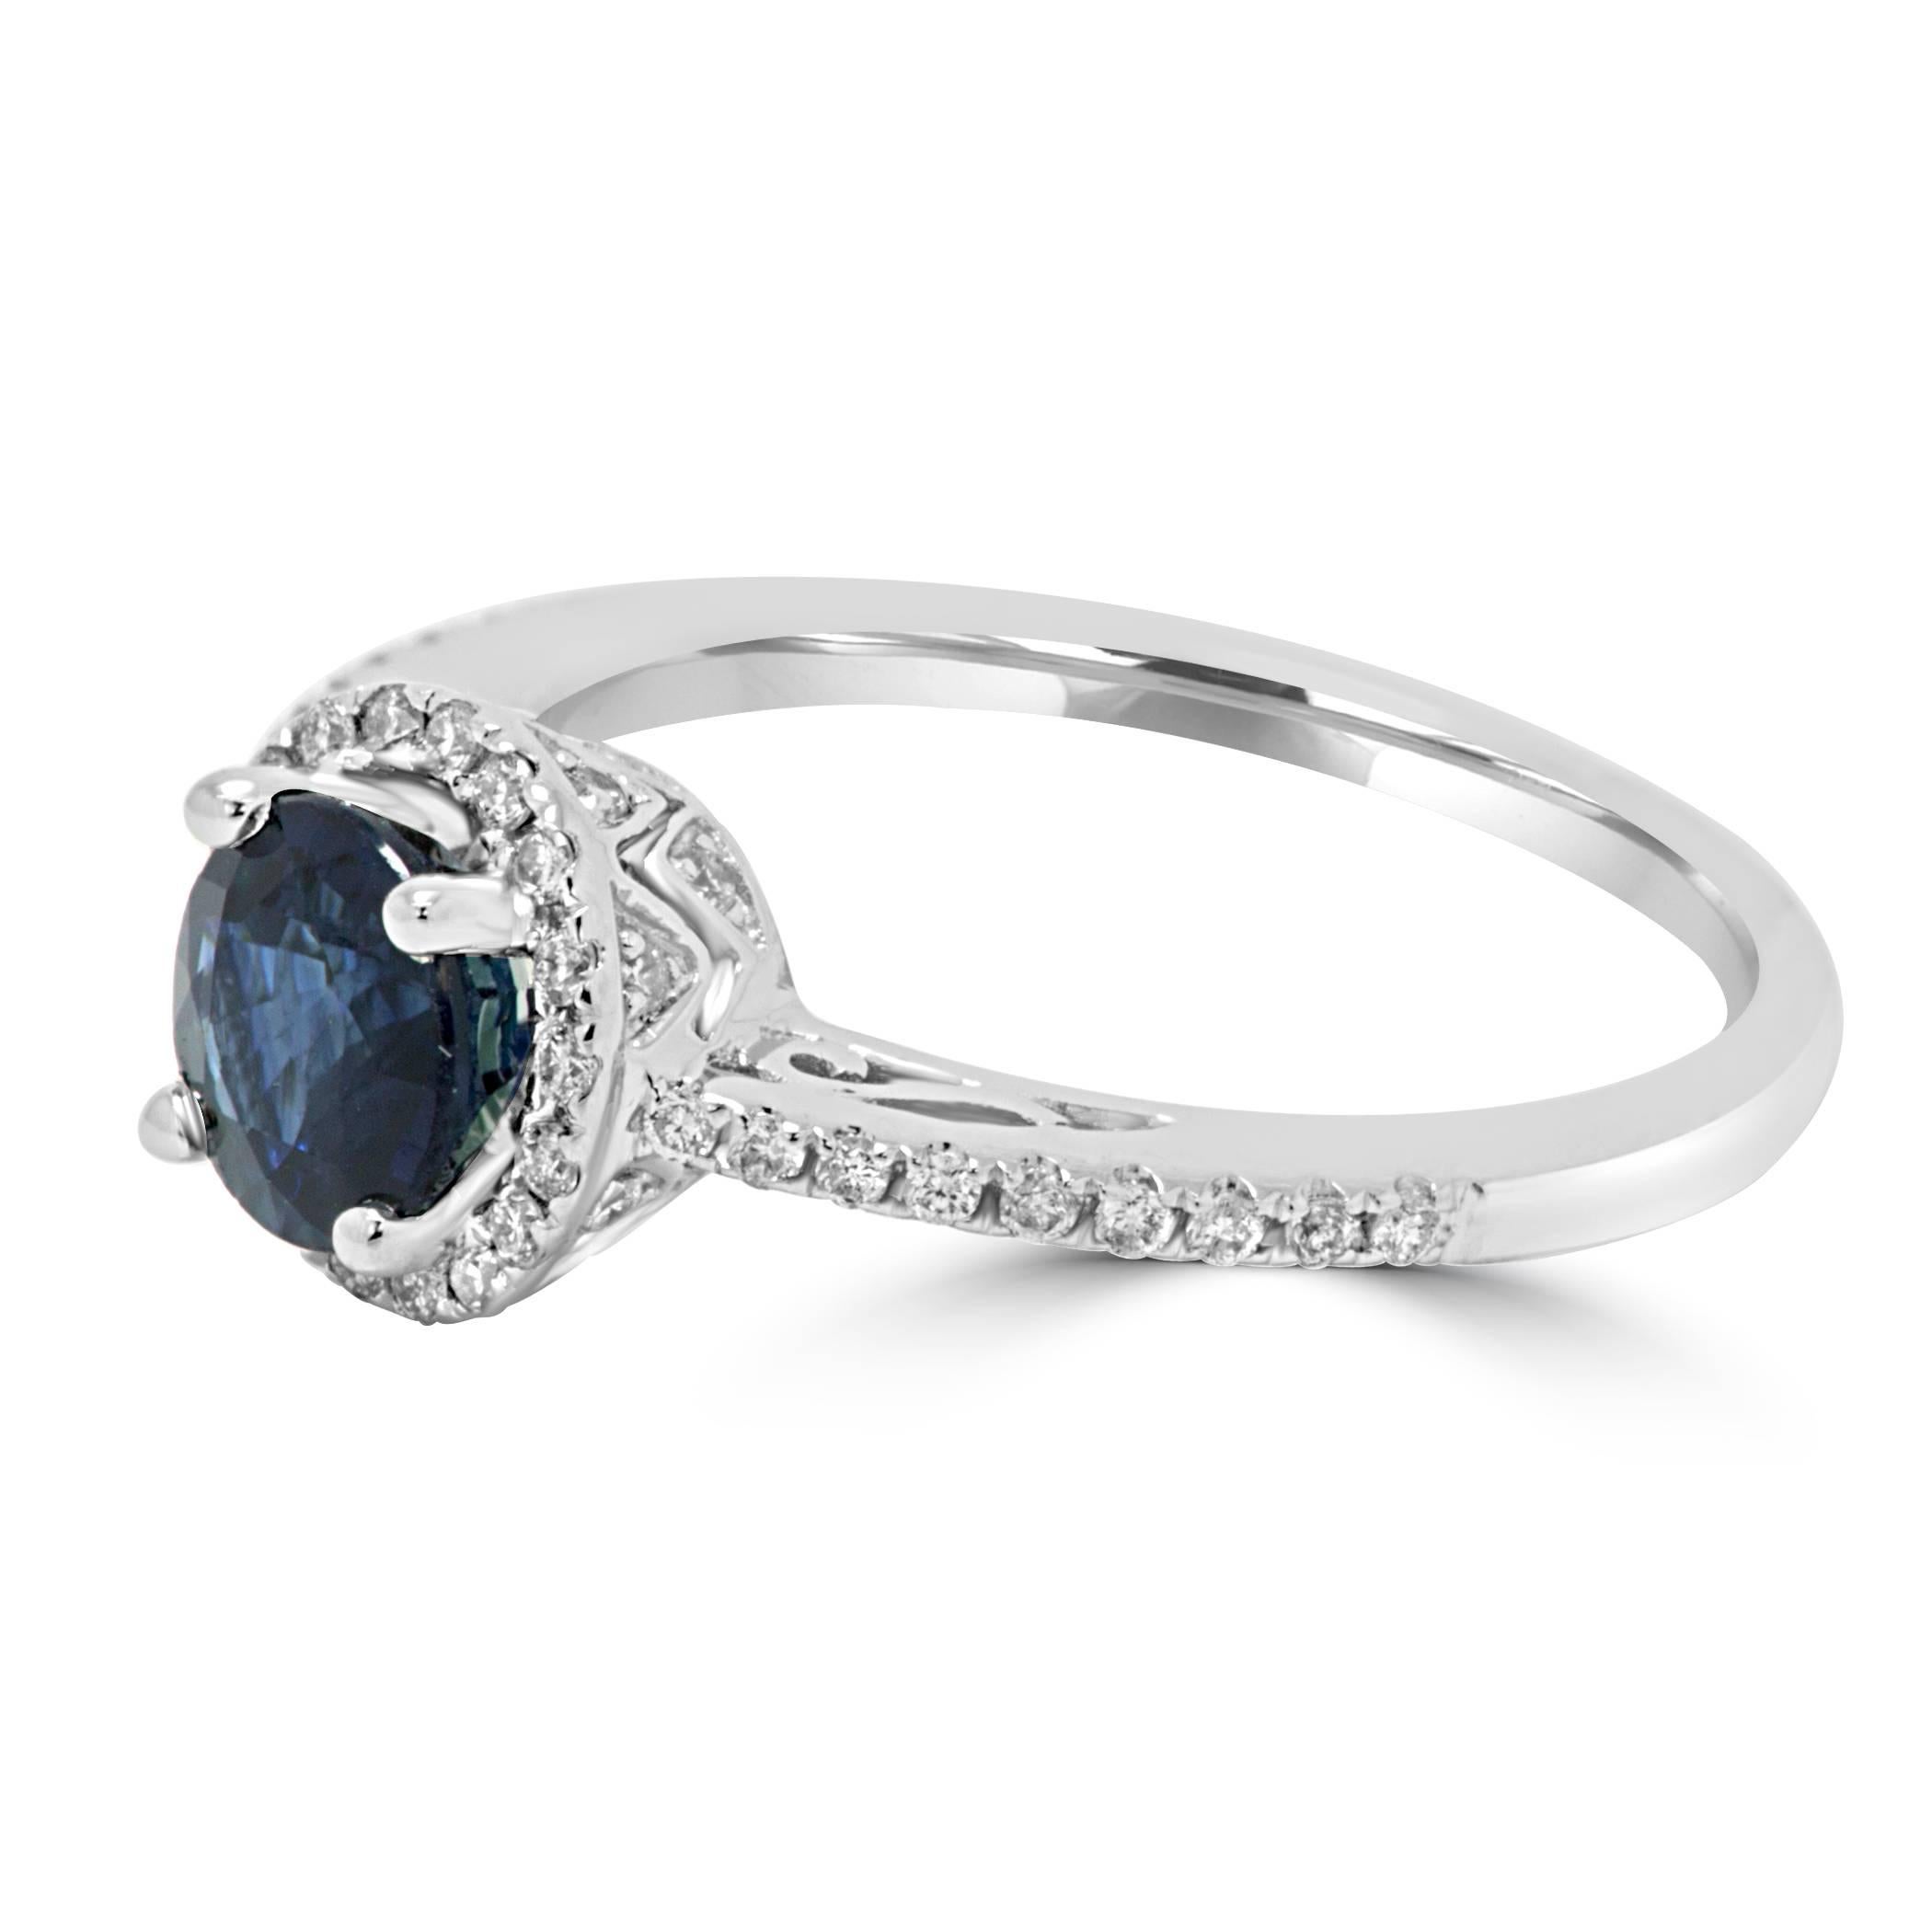 Blue Sapphire Round Diamond Cut 1.31 Carat encircled in a single halo of white G-H Color SI Clarity diamond round 0.30 Carat in a Simple classic 14K  White Gold Bridal Fashion Cocktail Ring.

Style available in different price ranges. Prices are